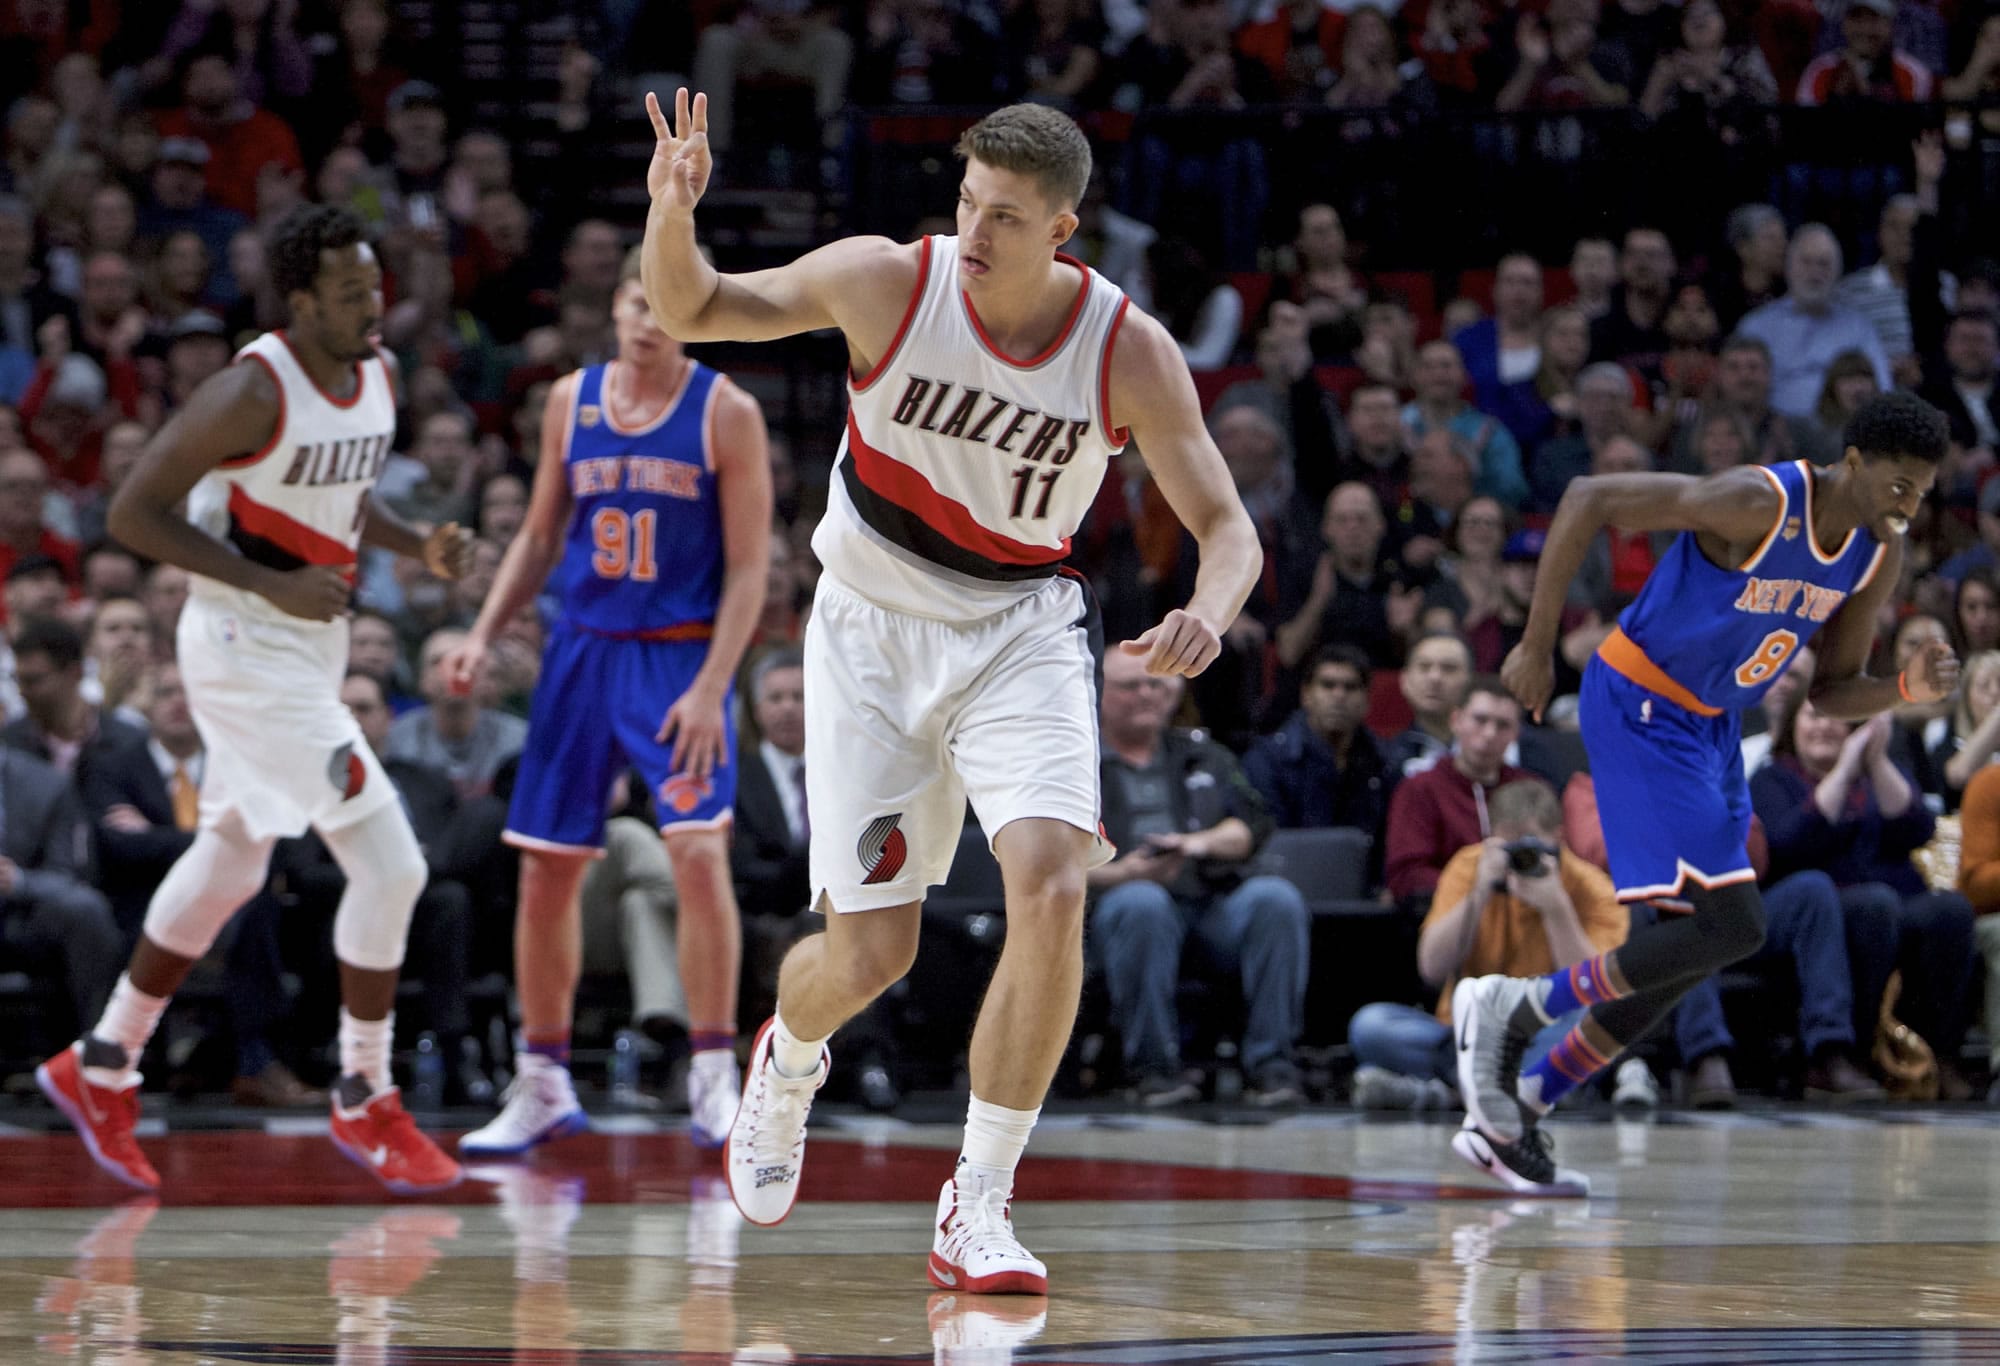 Portland Trail Blazers forward Meyers Leonard signels after making a 3-point basket against the New York Knicks during the first half of an NBA basketball game in Portland, Ore., Thursday, March 23, 2017.